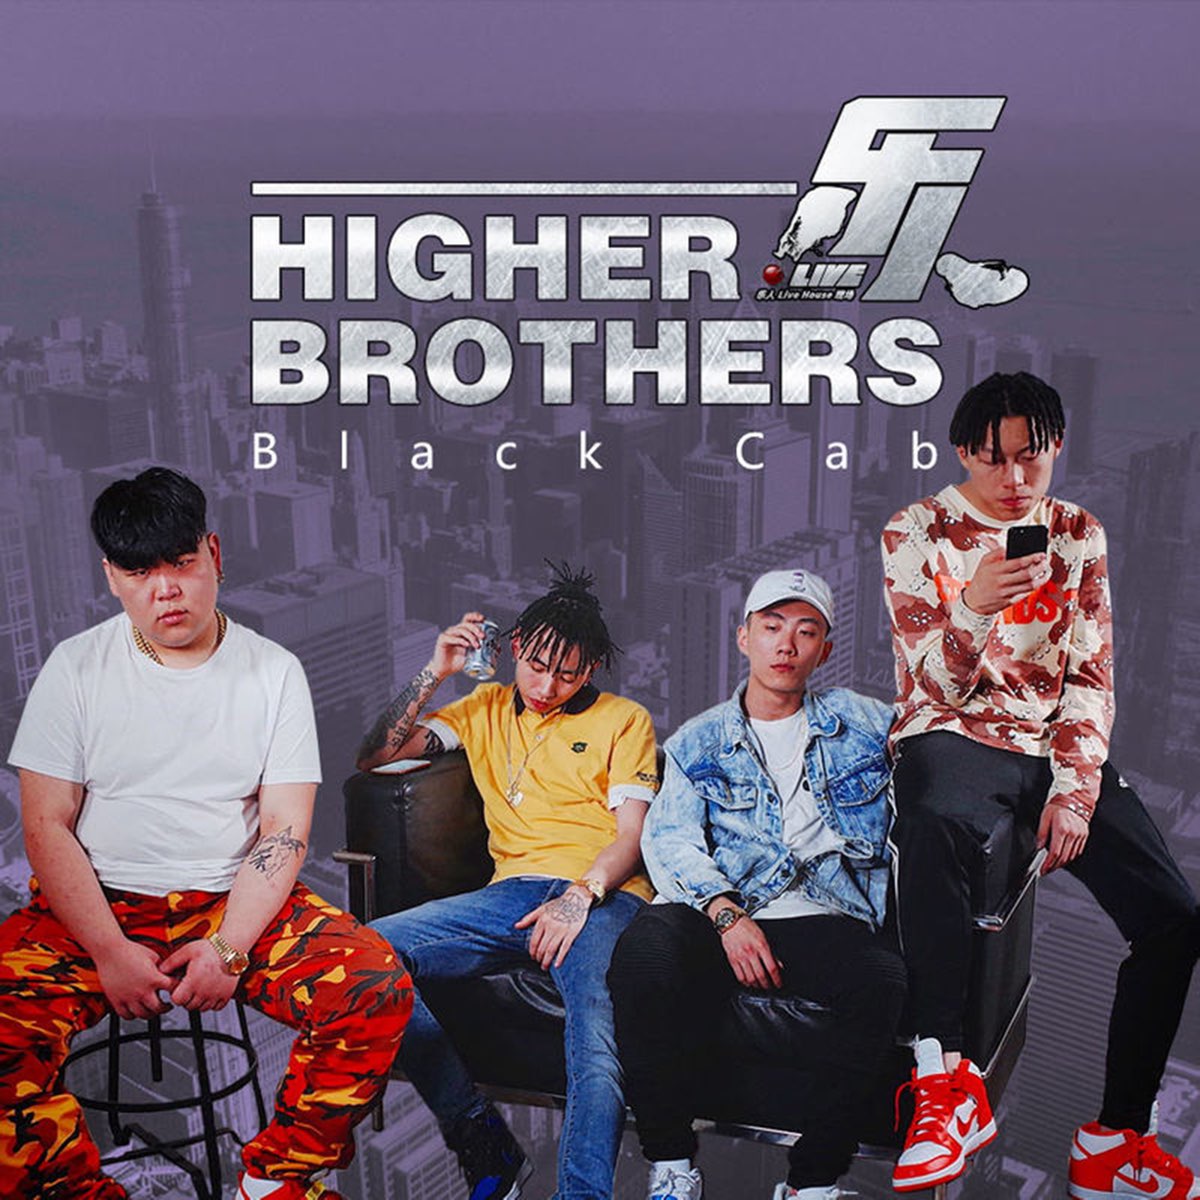 Higher brothers песни. Made in China higher brothers. Higher brothers кто это.